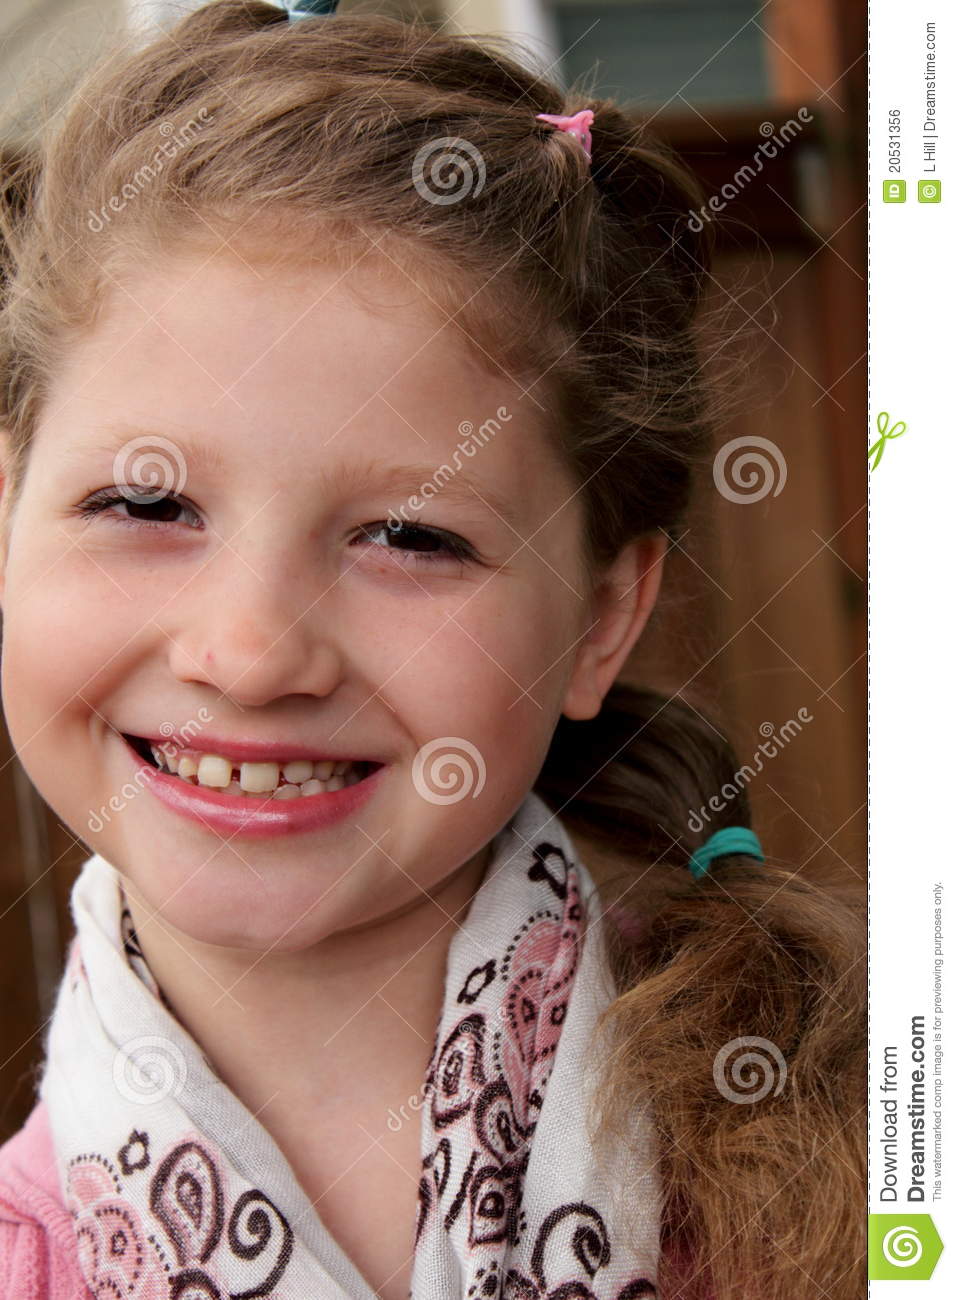 Pretty Little Girl With Big Grin Royalty Free Stock Image   Image